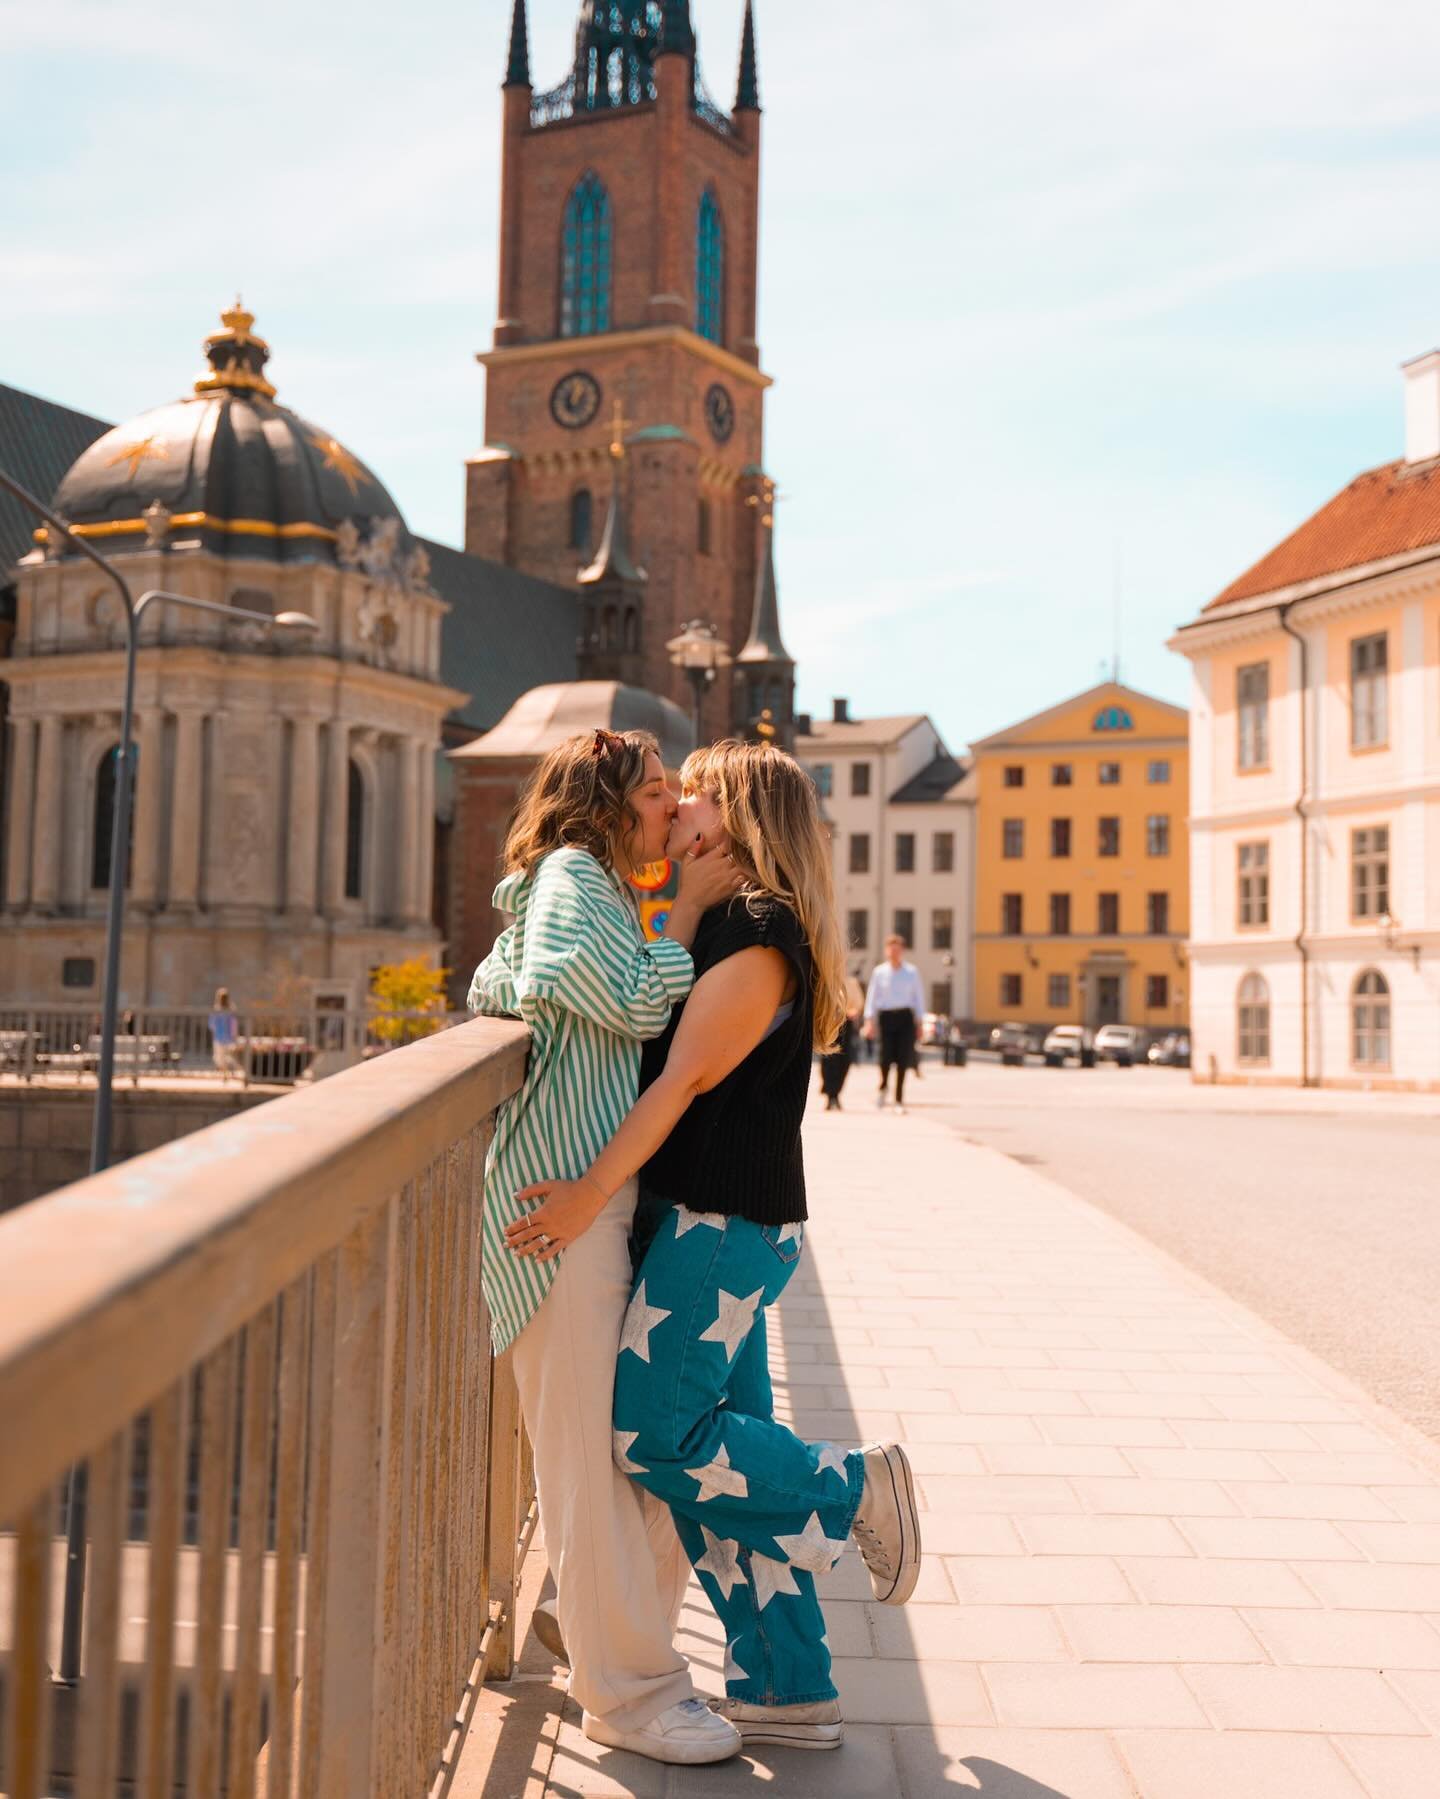 Stockholm, you are magical! ✨🇸🇪

There&rsquo;s no secret that Sweden is one of our favorite countries in the world. One of our BFFs live here and Shanna has personally visited the country like 6 times! On this trip we feel like we really have gotte